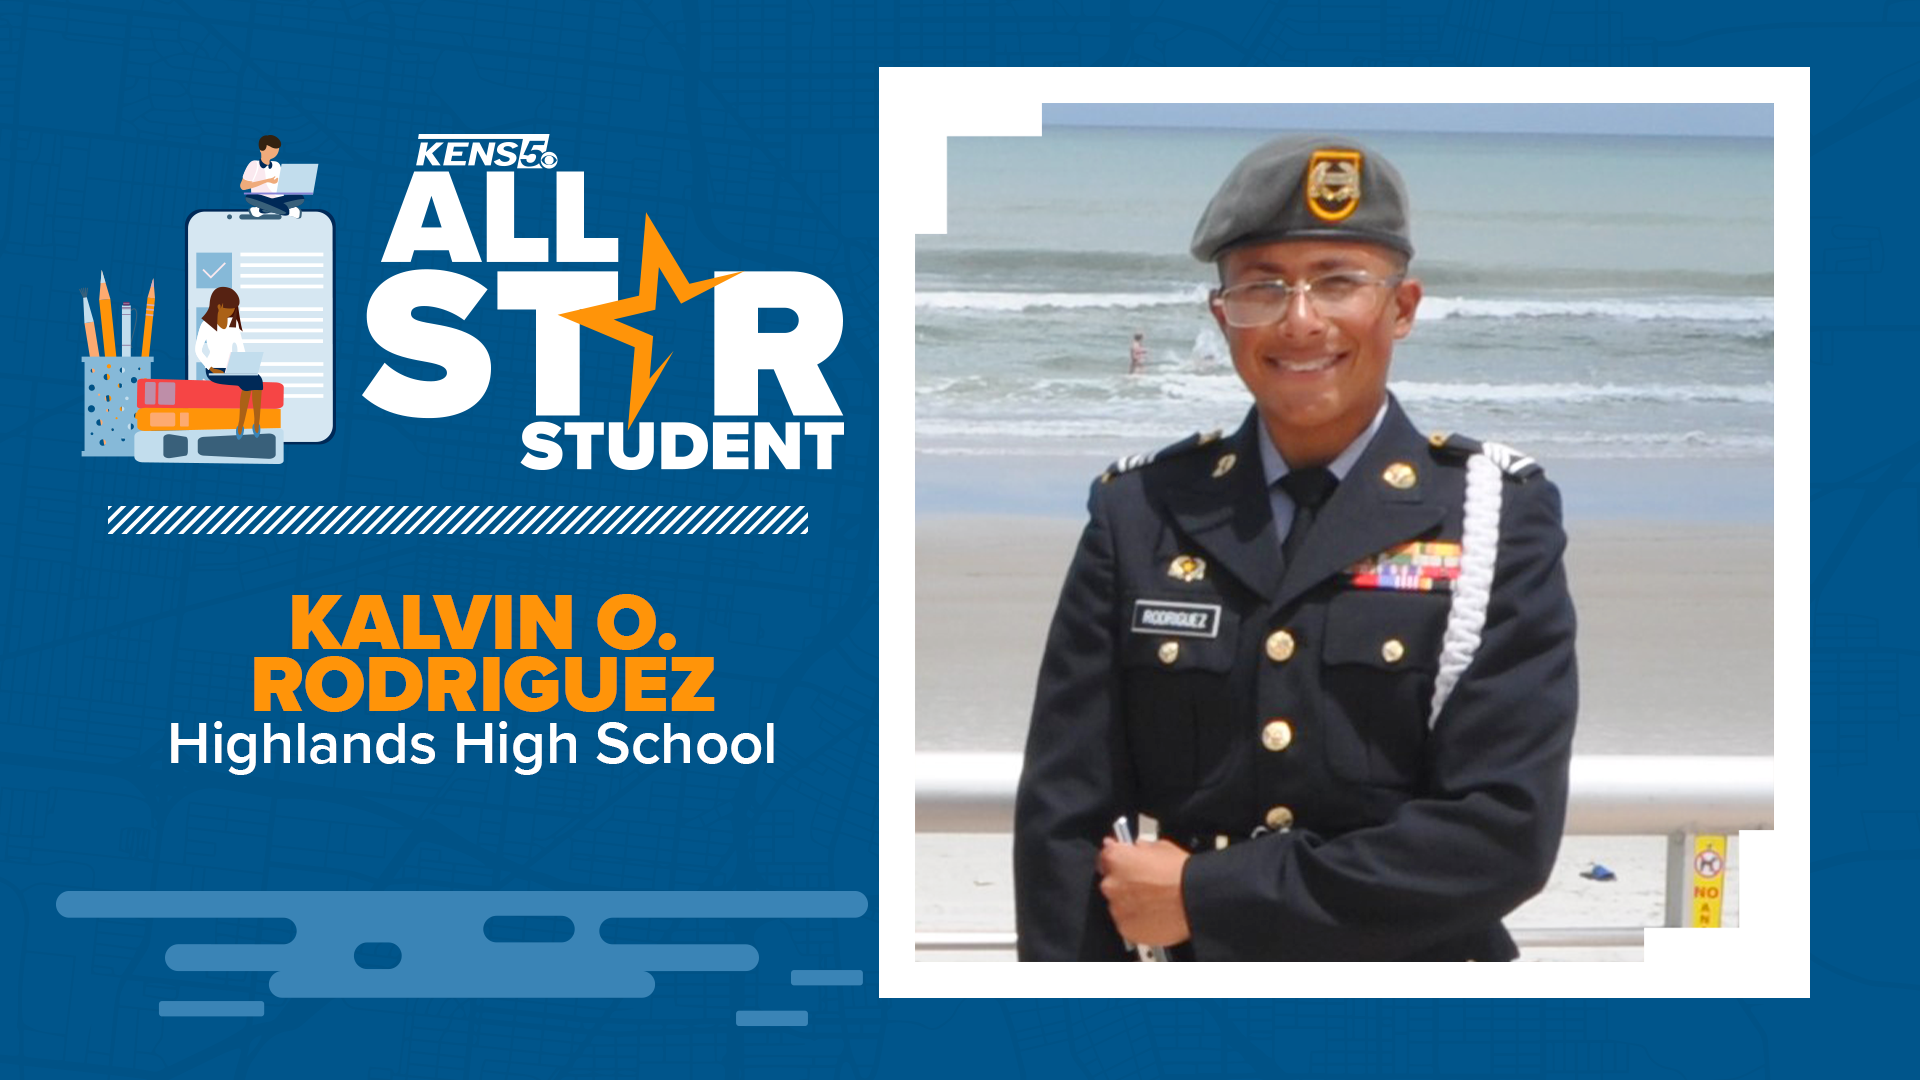 Kalvin Rodriguez is a leader in the Highlands High School JROTC program and is devoted to giving back.